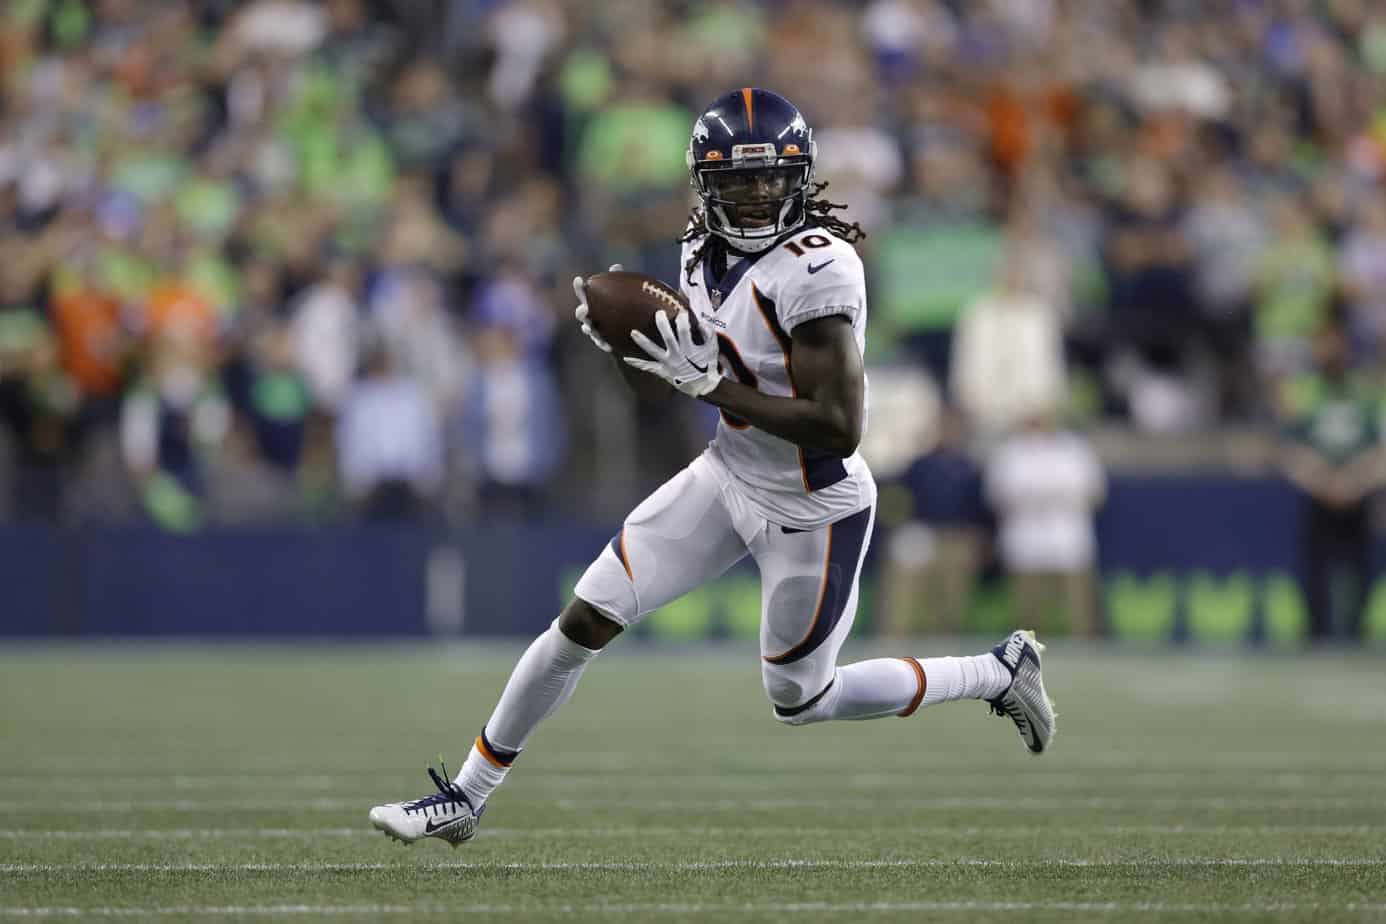 The OwnersBox NFL DFS slate has a lot of value for Broncos-Bills DFS on Monday Night Football, so let's look at DFS value plays for...